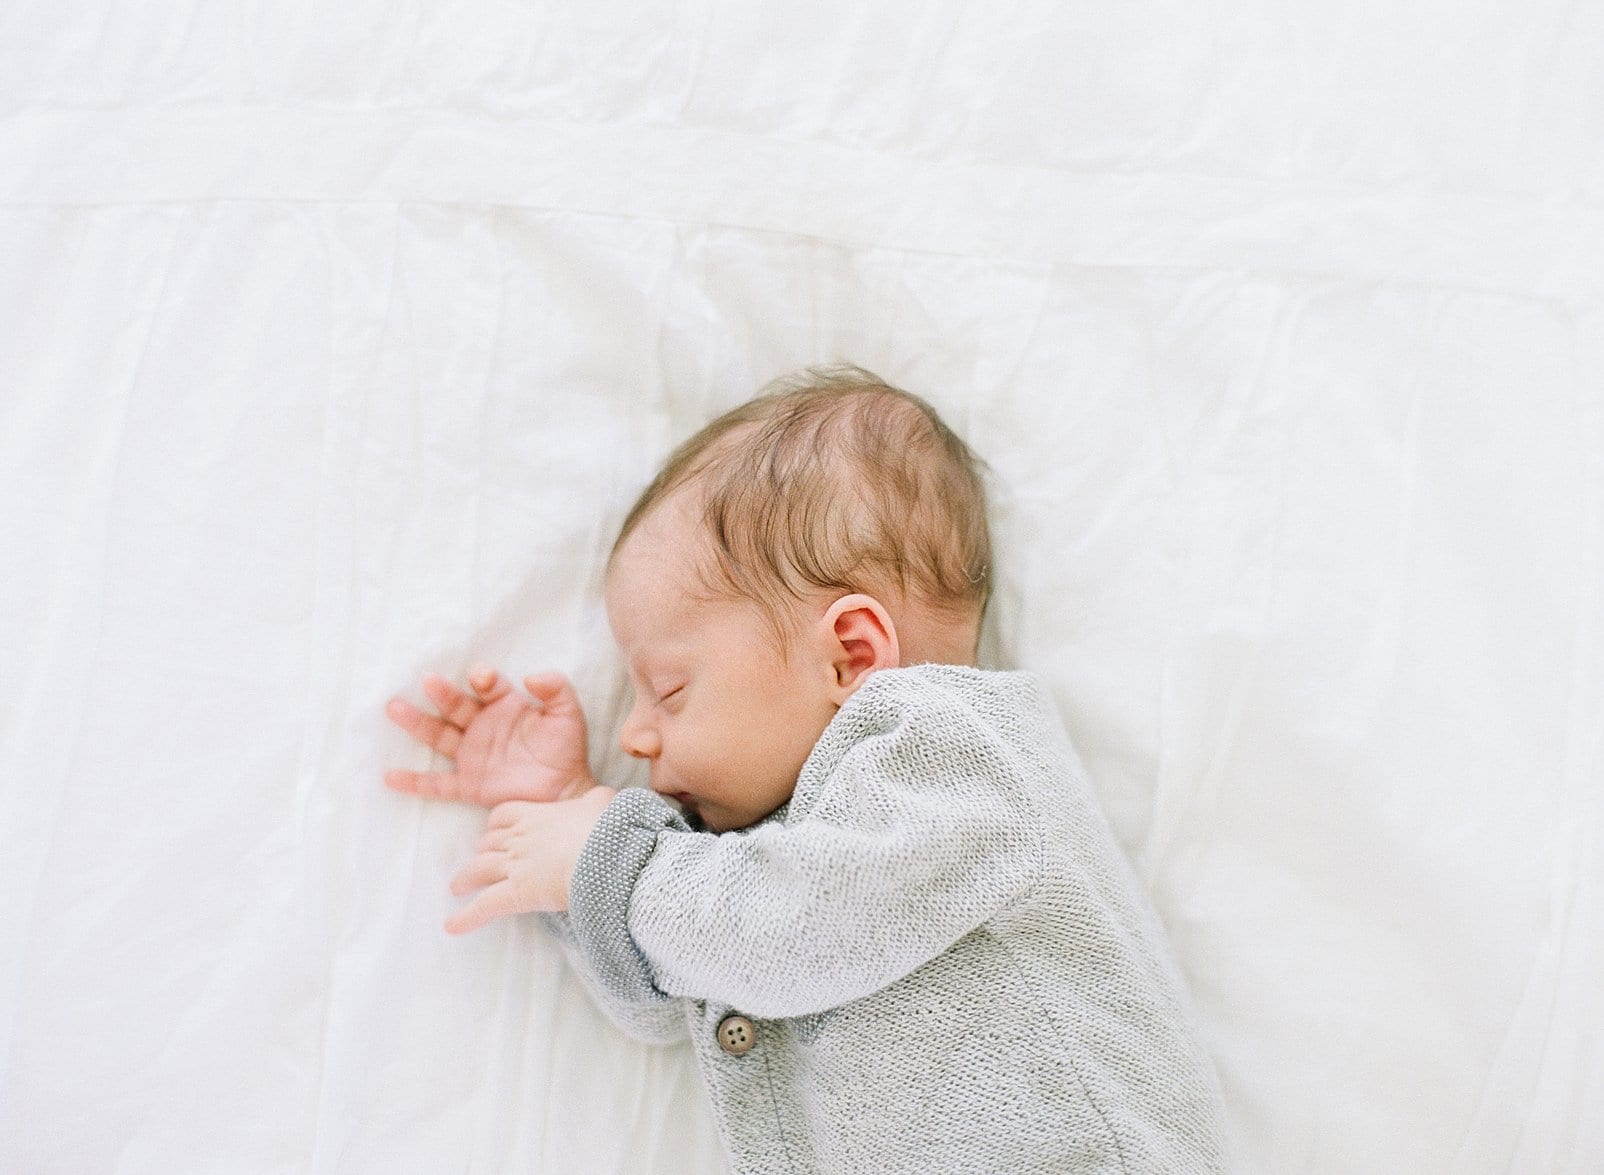 Raleigh newborn baby boy in a gray outfit laying on his side on a white bed photo